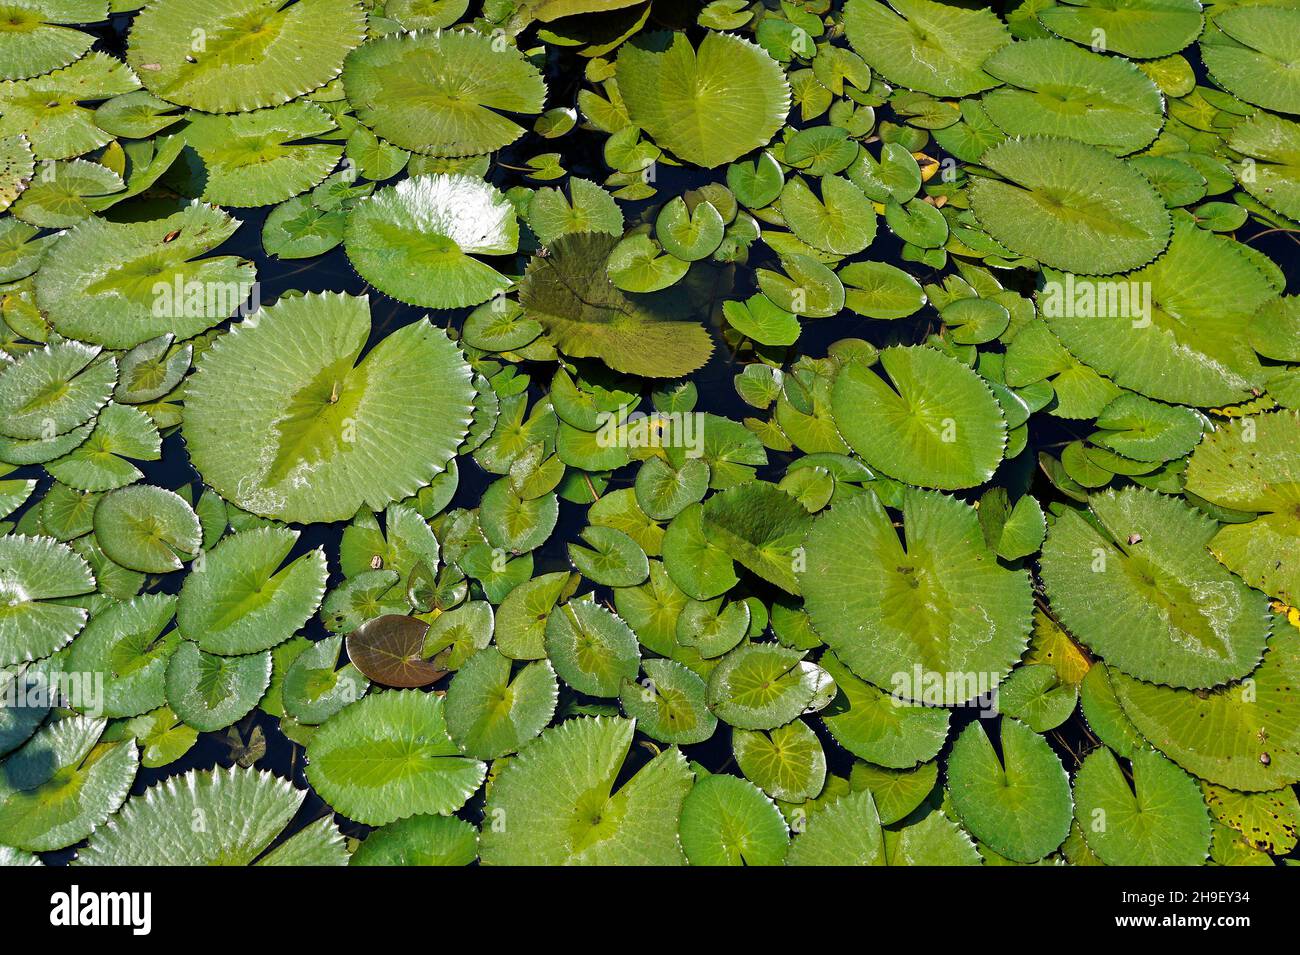 Lily pads (Nymphaea) on lake Stock Photo